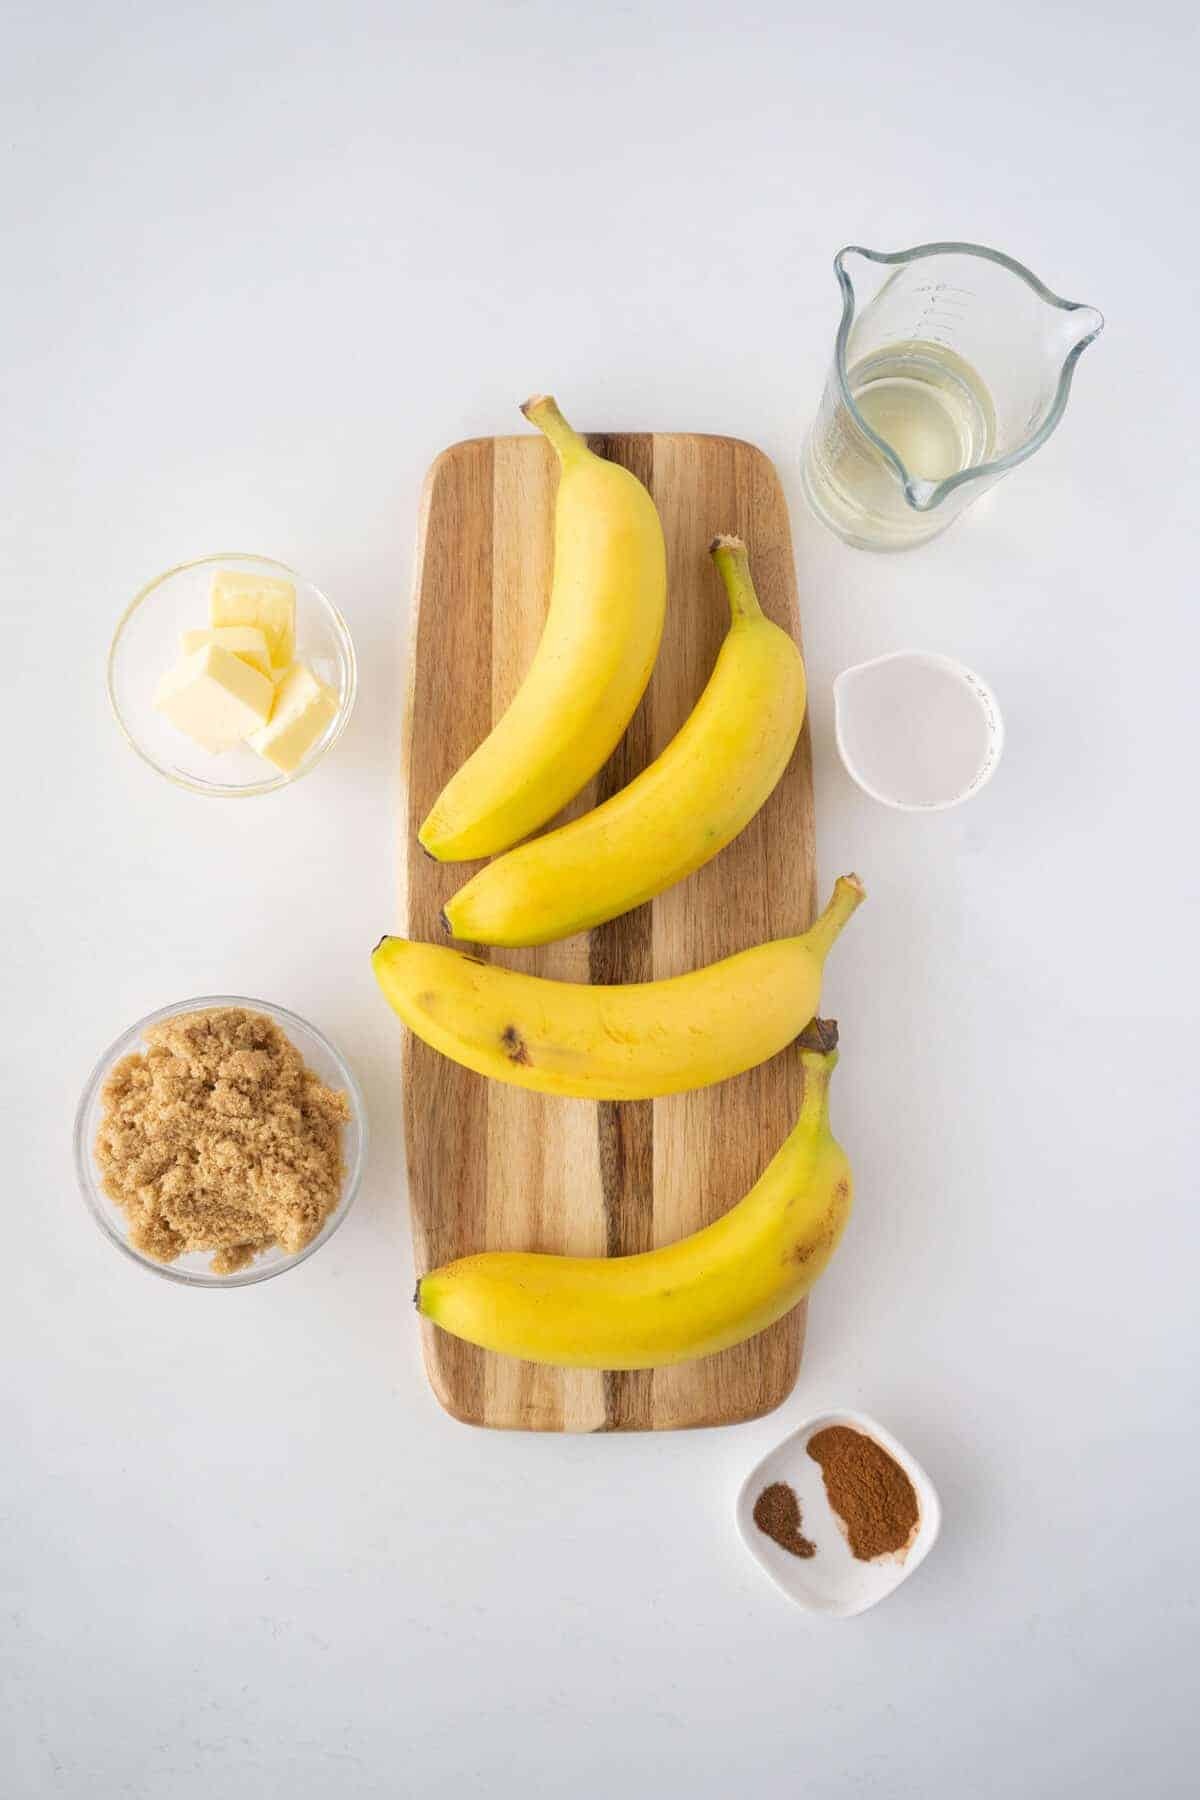 ingredients for bananas foster